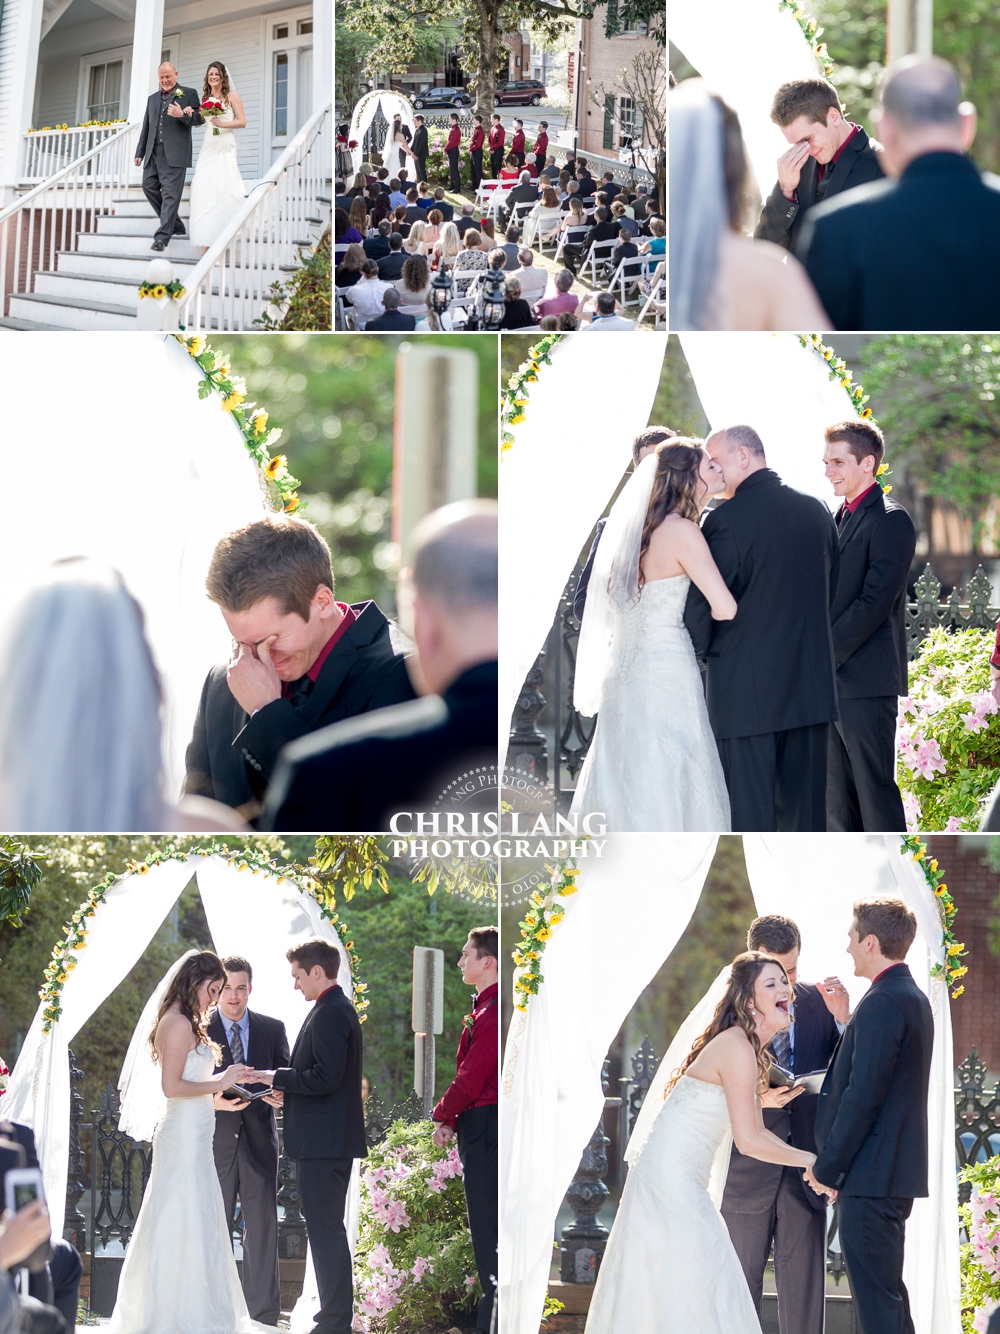 Pictures of Wedding Ceremony at Bellamy Mansion - Wilmington NC Wedding Photographers